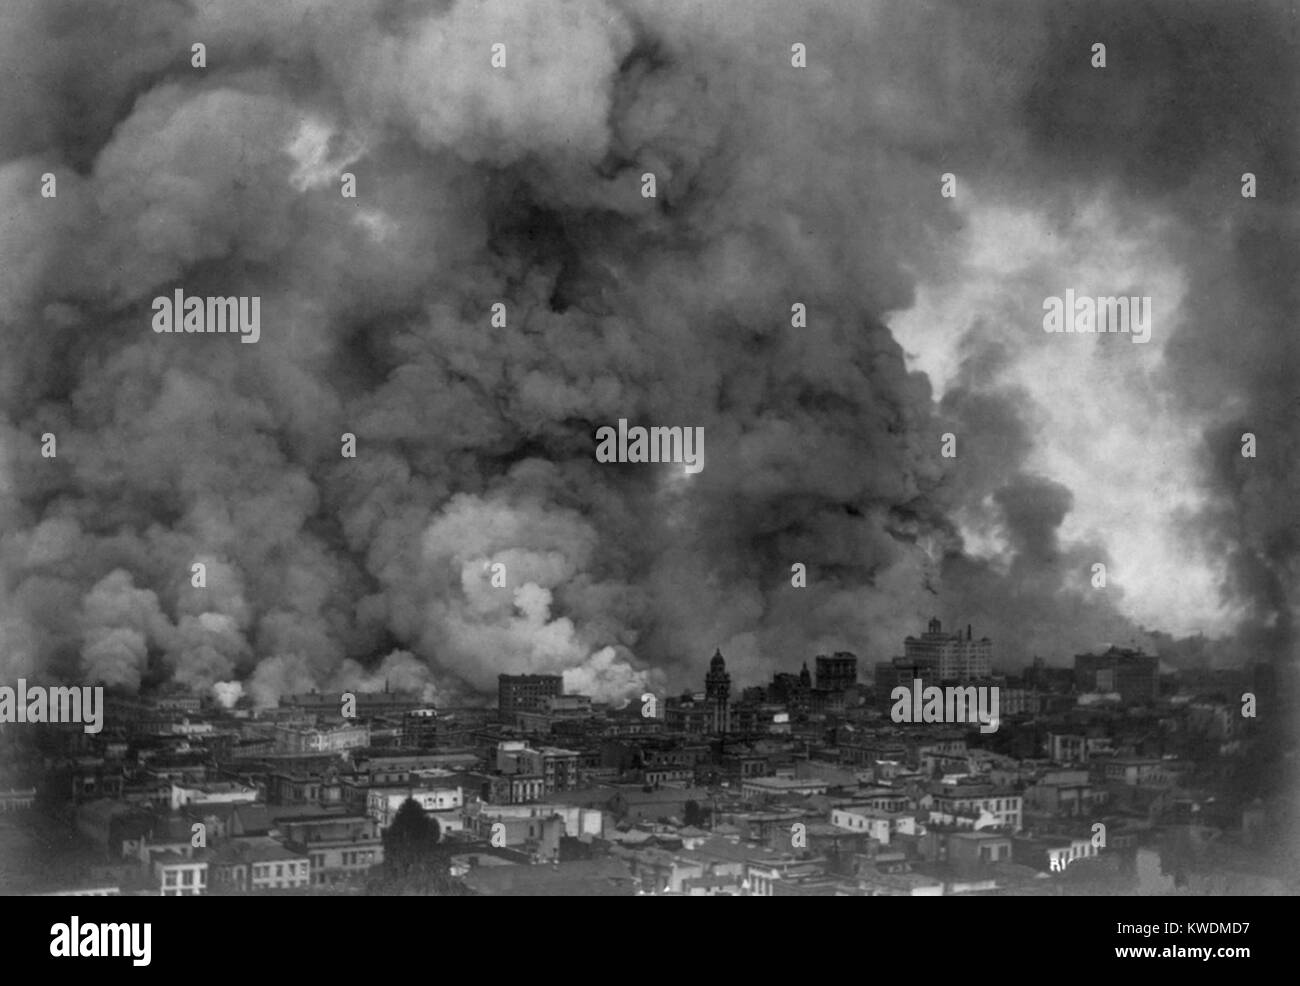 San Francisco in flames after April 18, 1906 earthquake. Within three days, fires caused by ruptured gas mains, destroyed approximately 25,000 buildings over 490 city blocks (BSLOC 2017 17 14) Stock Photo